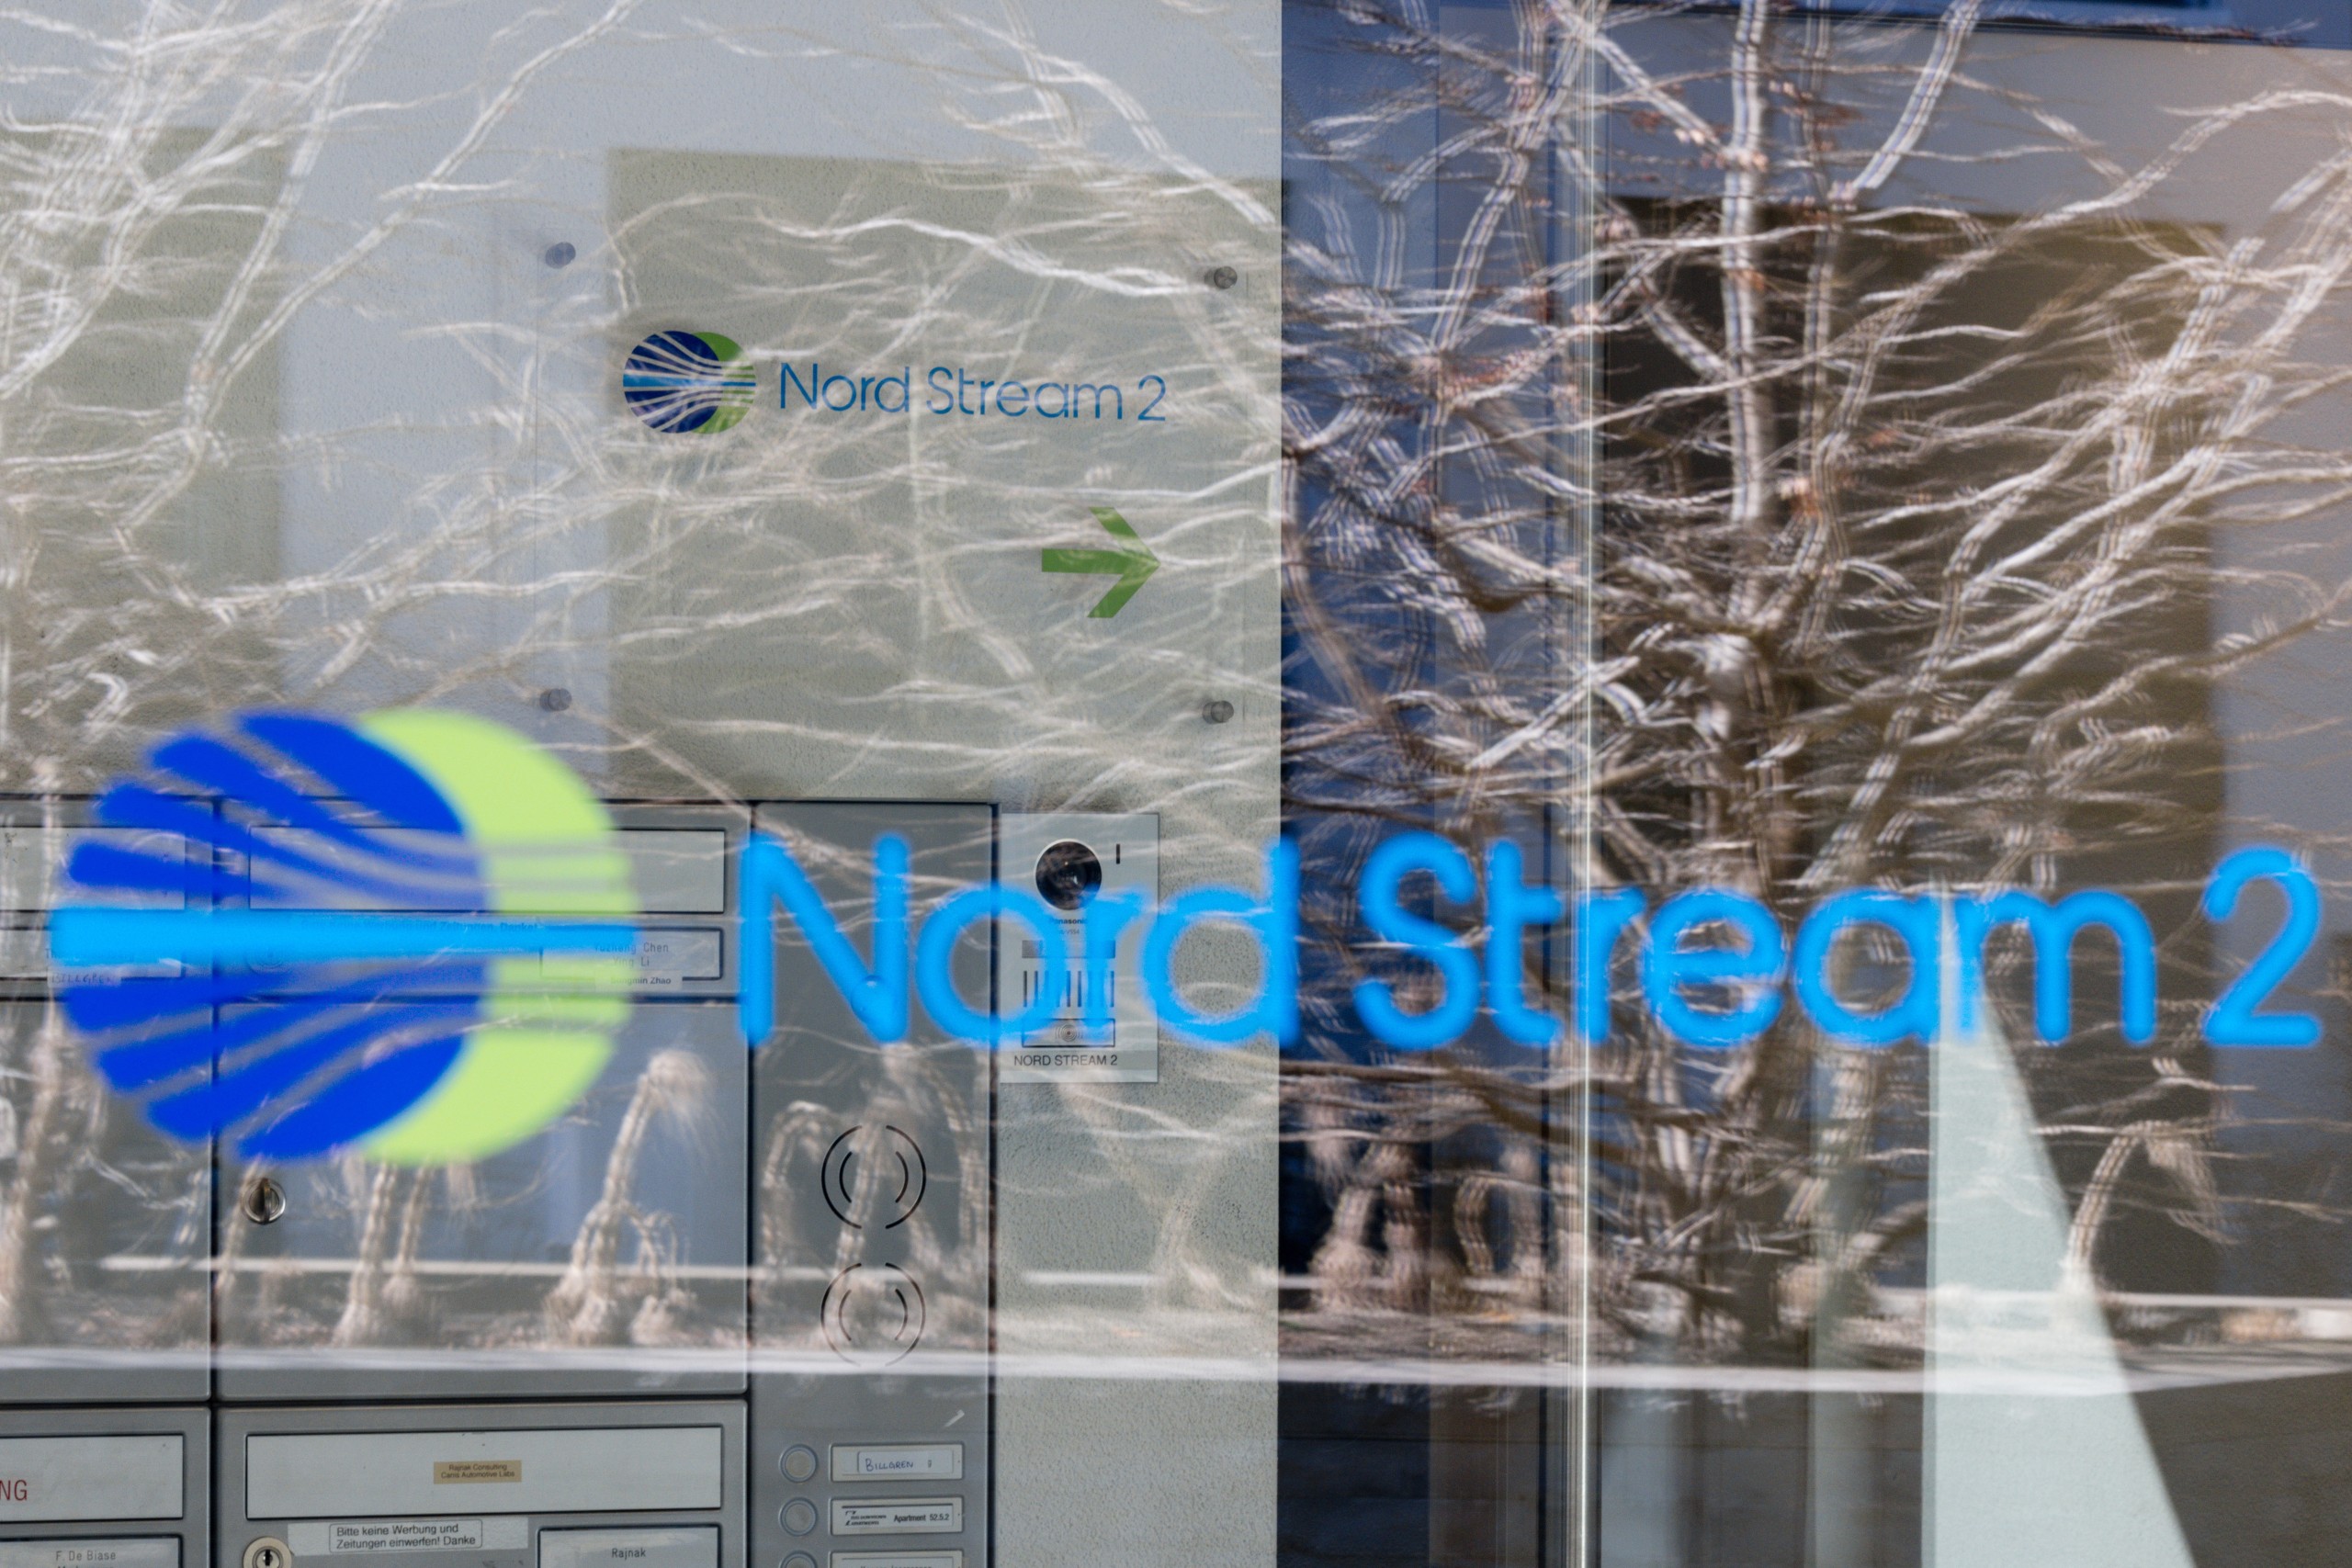 epa09793328 A Nord Stream 2 logo is seen on a reflected glass front of the company's Switzerland headquarters in Zug, Switzerland, 01 March 2022. Zug-based Nord Stream 2, which is implementing the gas pipeline between Russia and Germany, has carried out a mass layoff because of the sanctions taken against Russia. 140 people have lost their jobs, said Swiss Federal Councillor Guy Parmelin.  EPA/PHILIPP SCHMIDLI